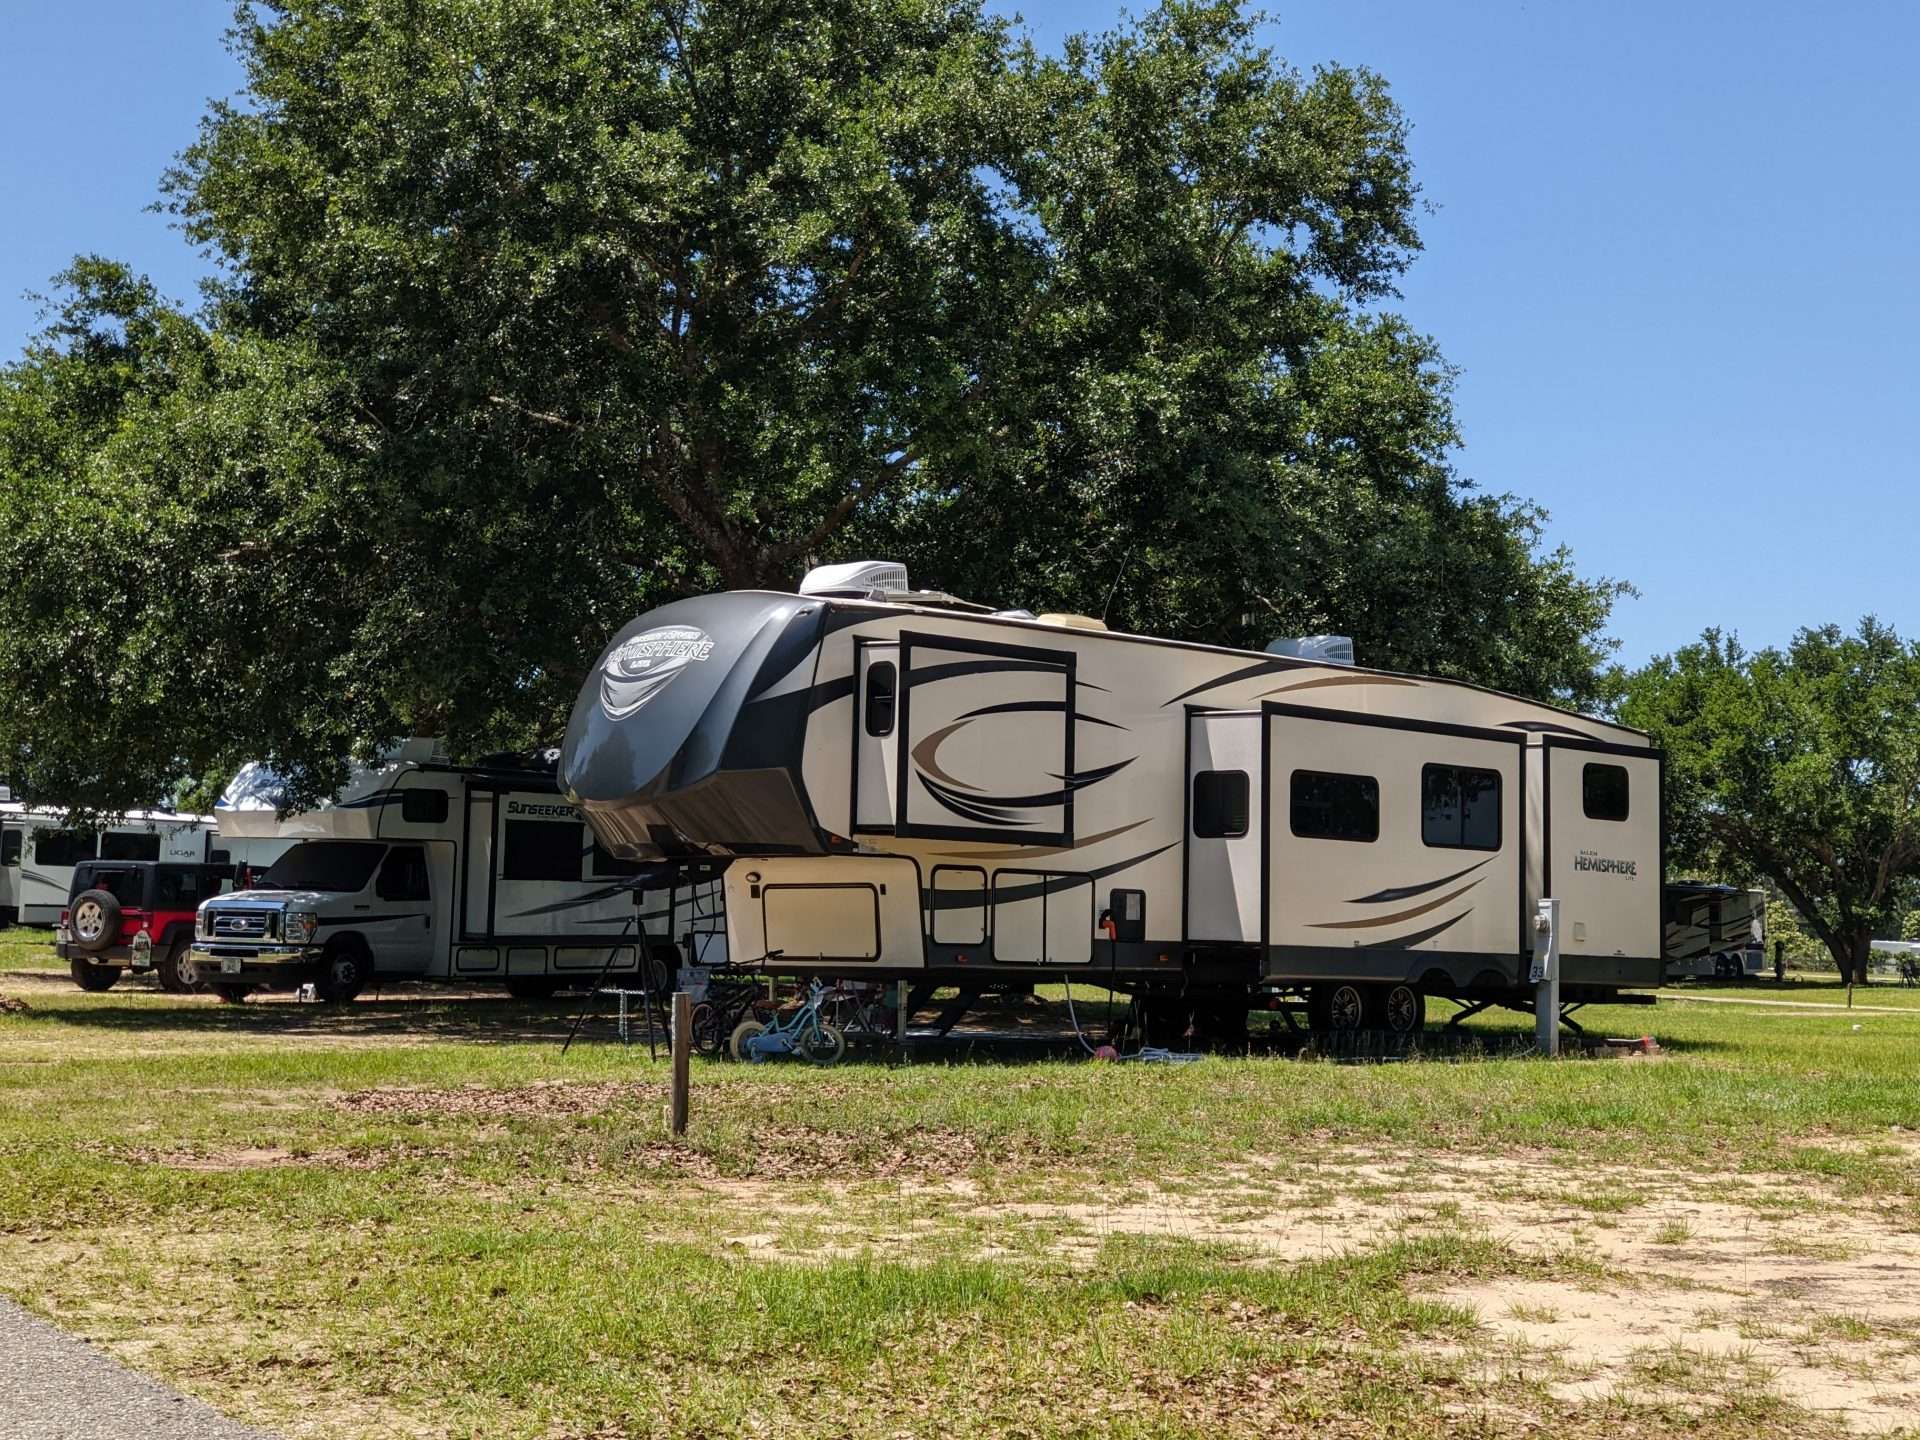 RV parked at busy campsite